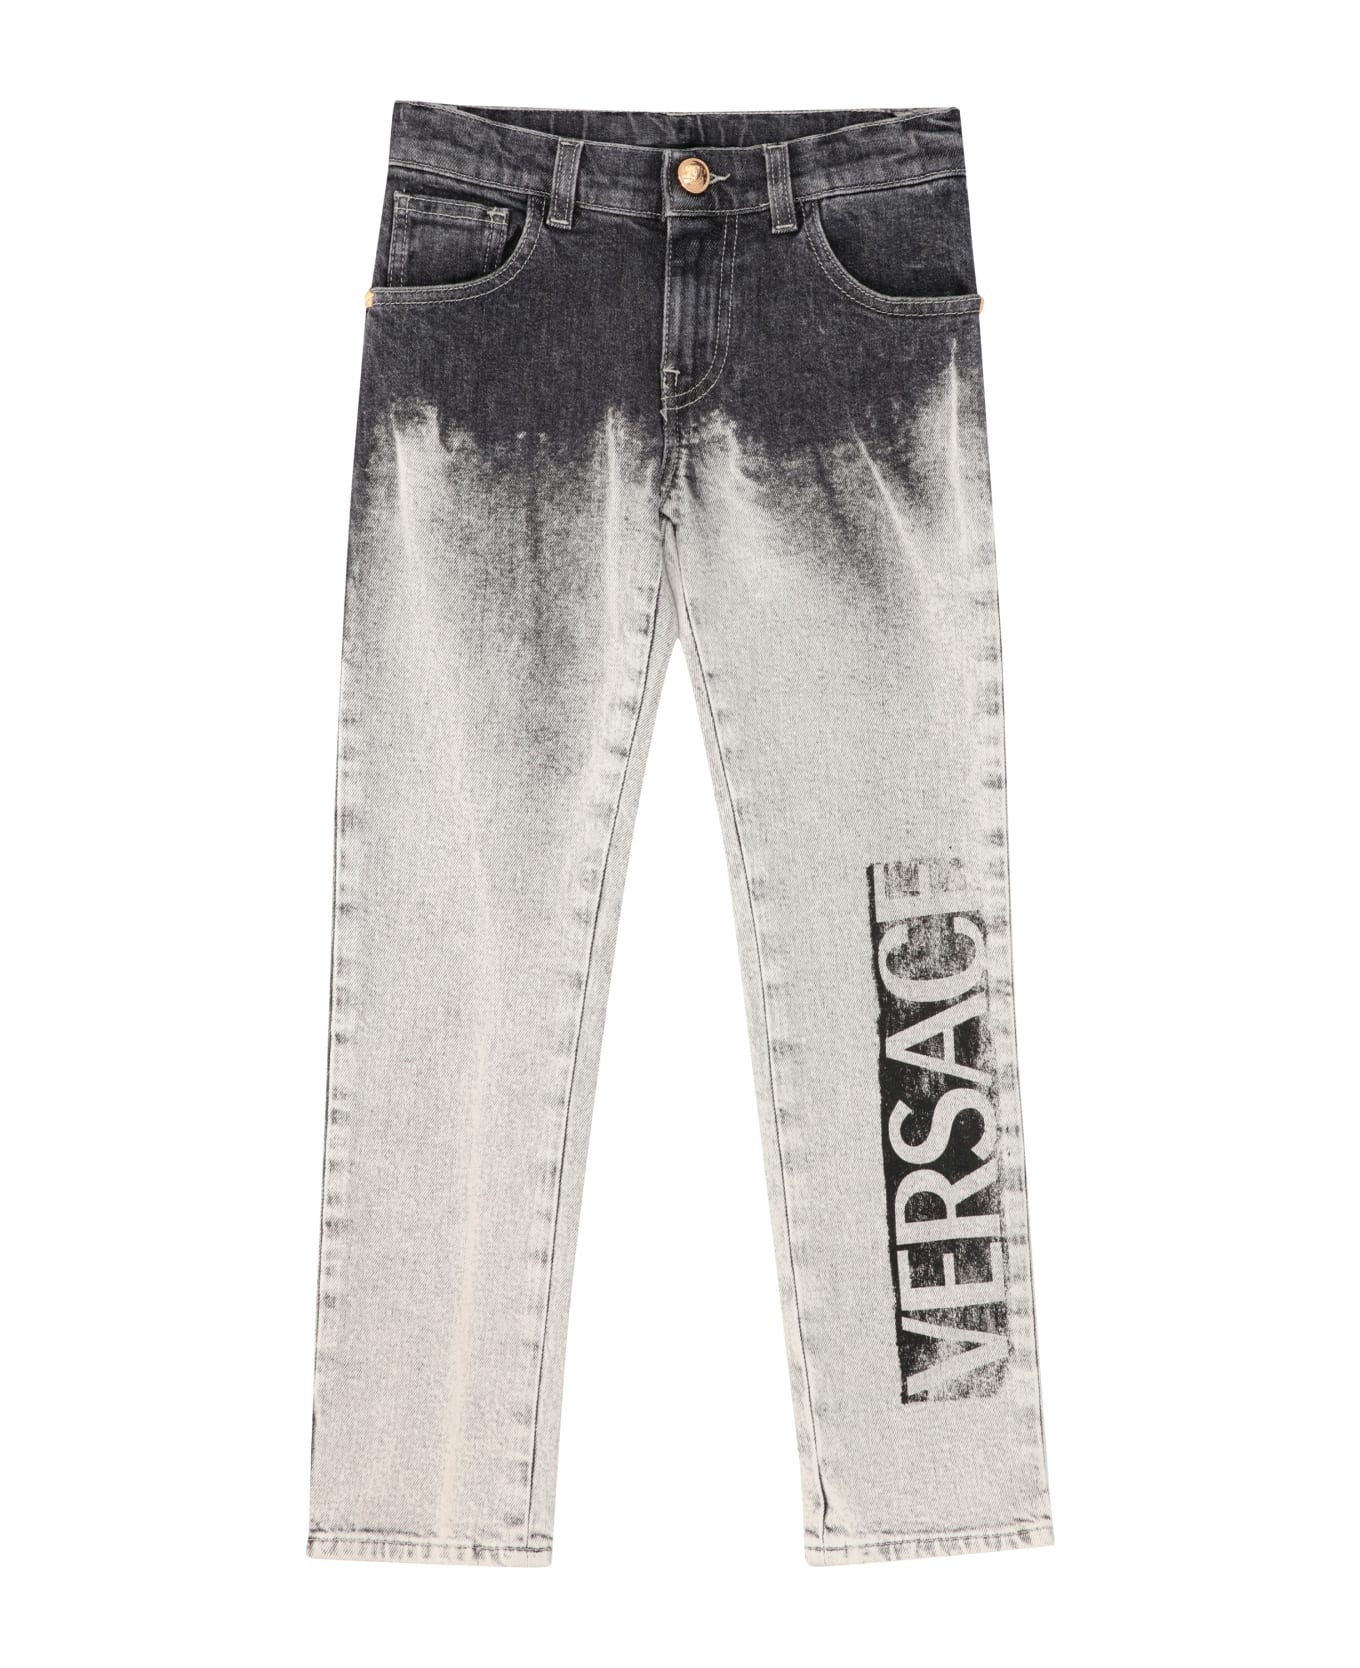 Young Versace 5-pocket Jeans - grey ボトムス